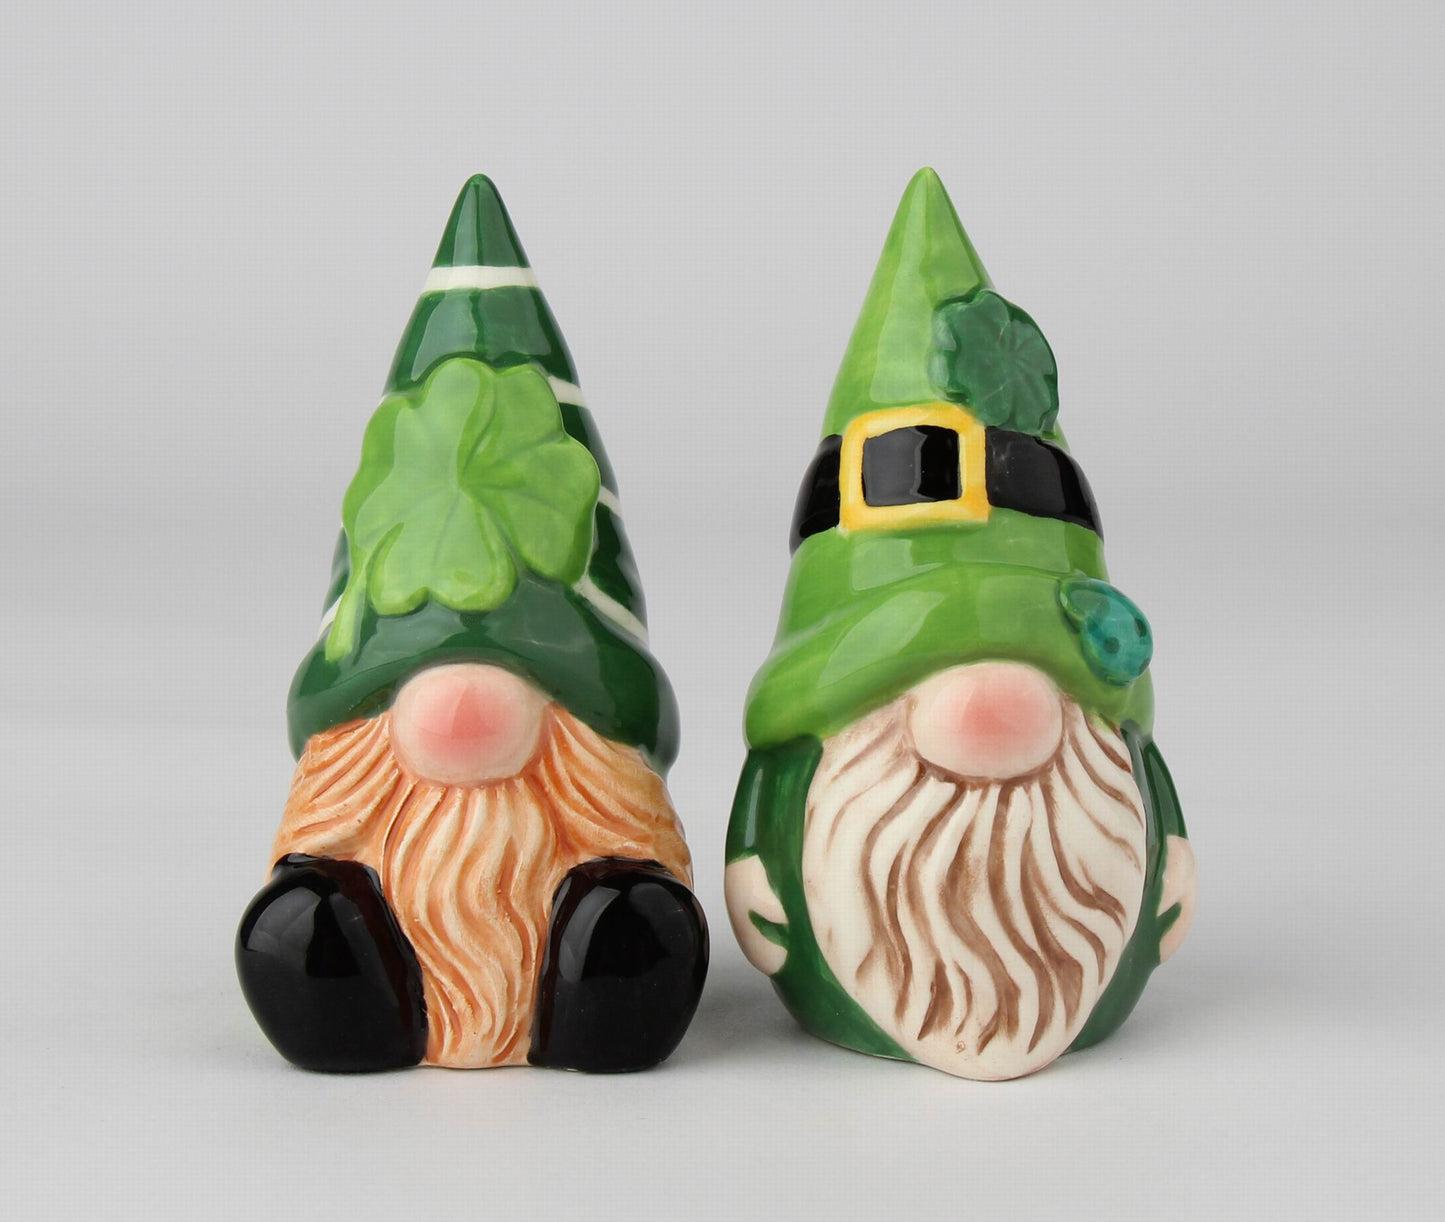 Ceramic Irish Gnomes Salt and Pepper Shakers, Home Décor, Gift for Her, Gift for Mom, Kitchen Décor, Irish Saint Patrick’s Day Décor